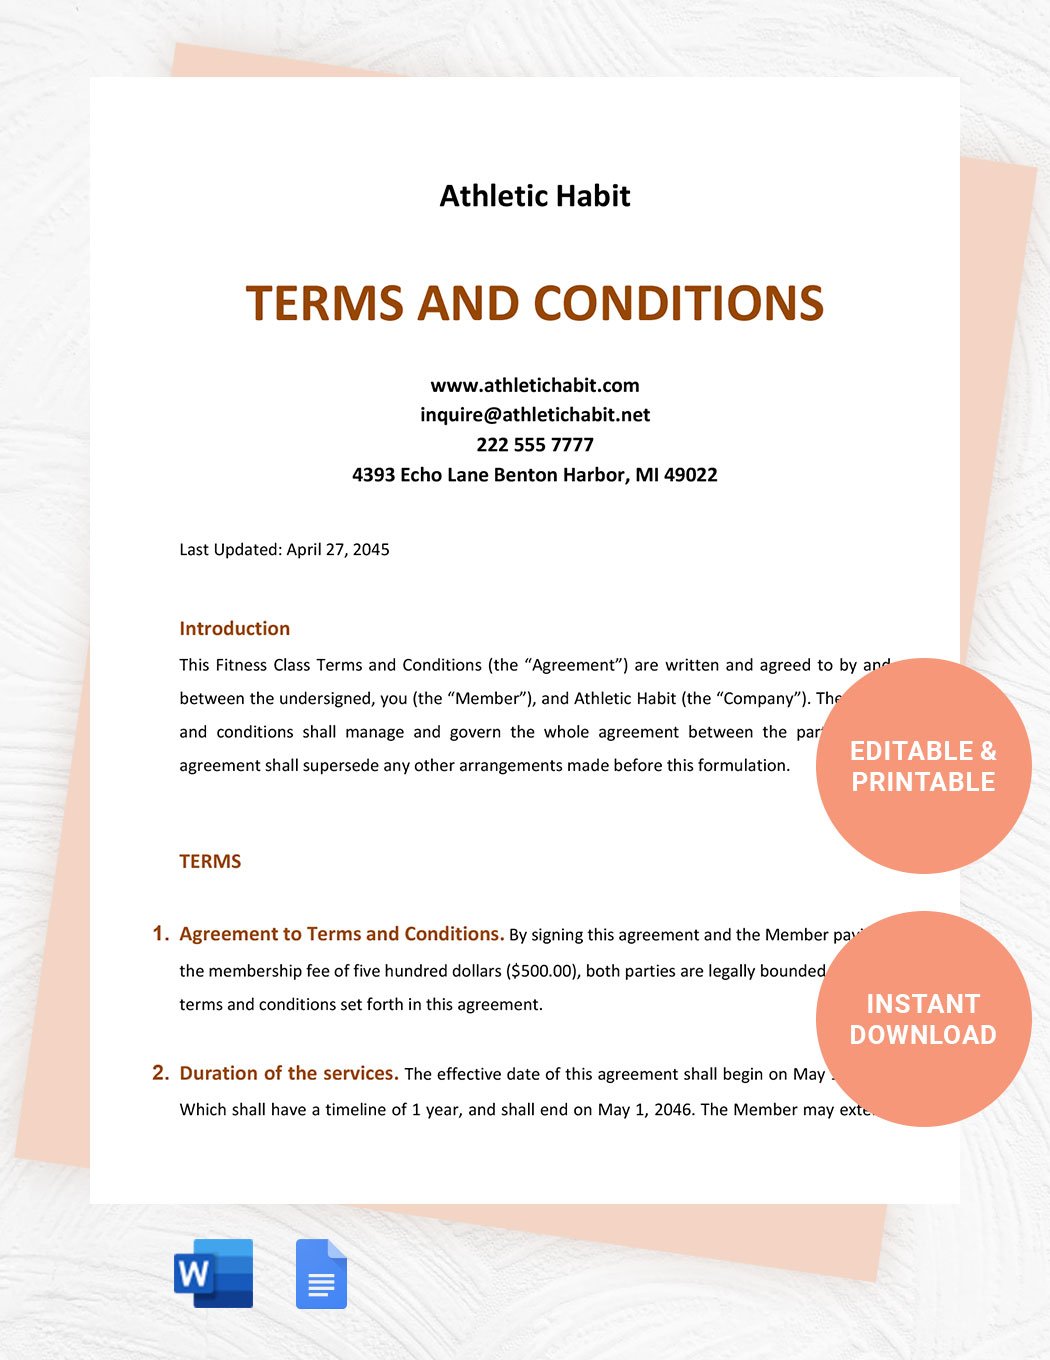 Fitness Class Terms And Conditions Template in Word, Google Docs